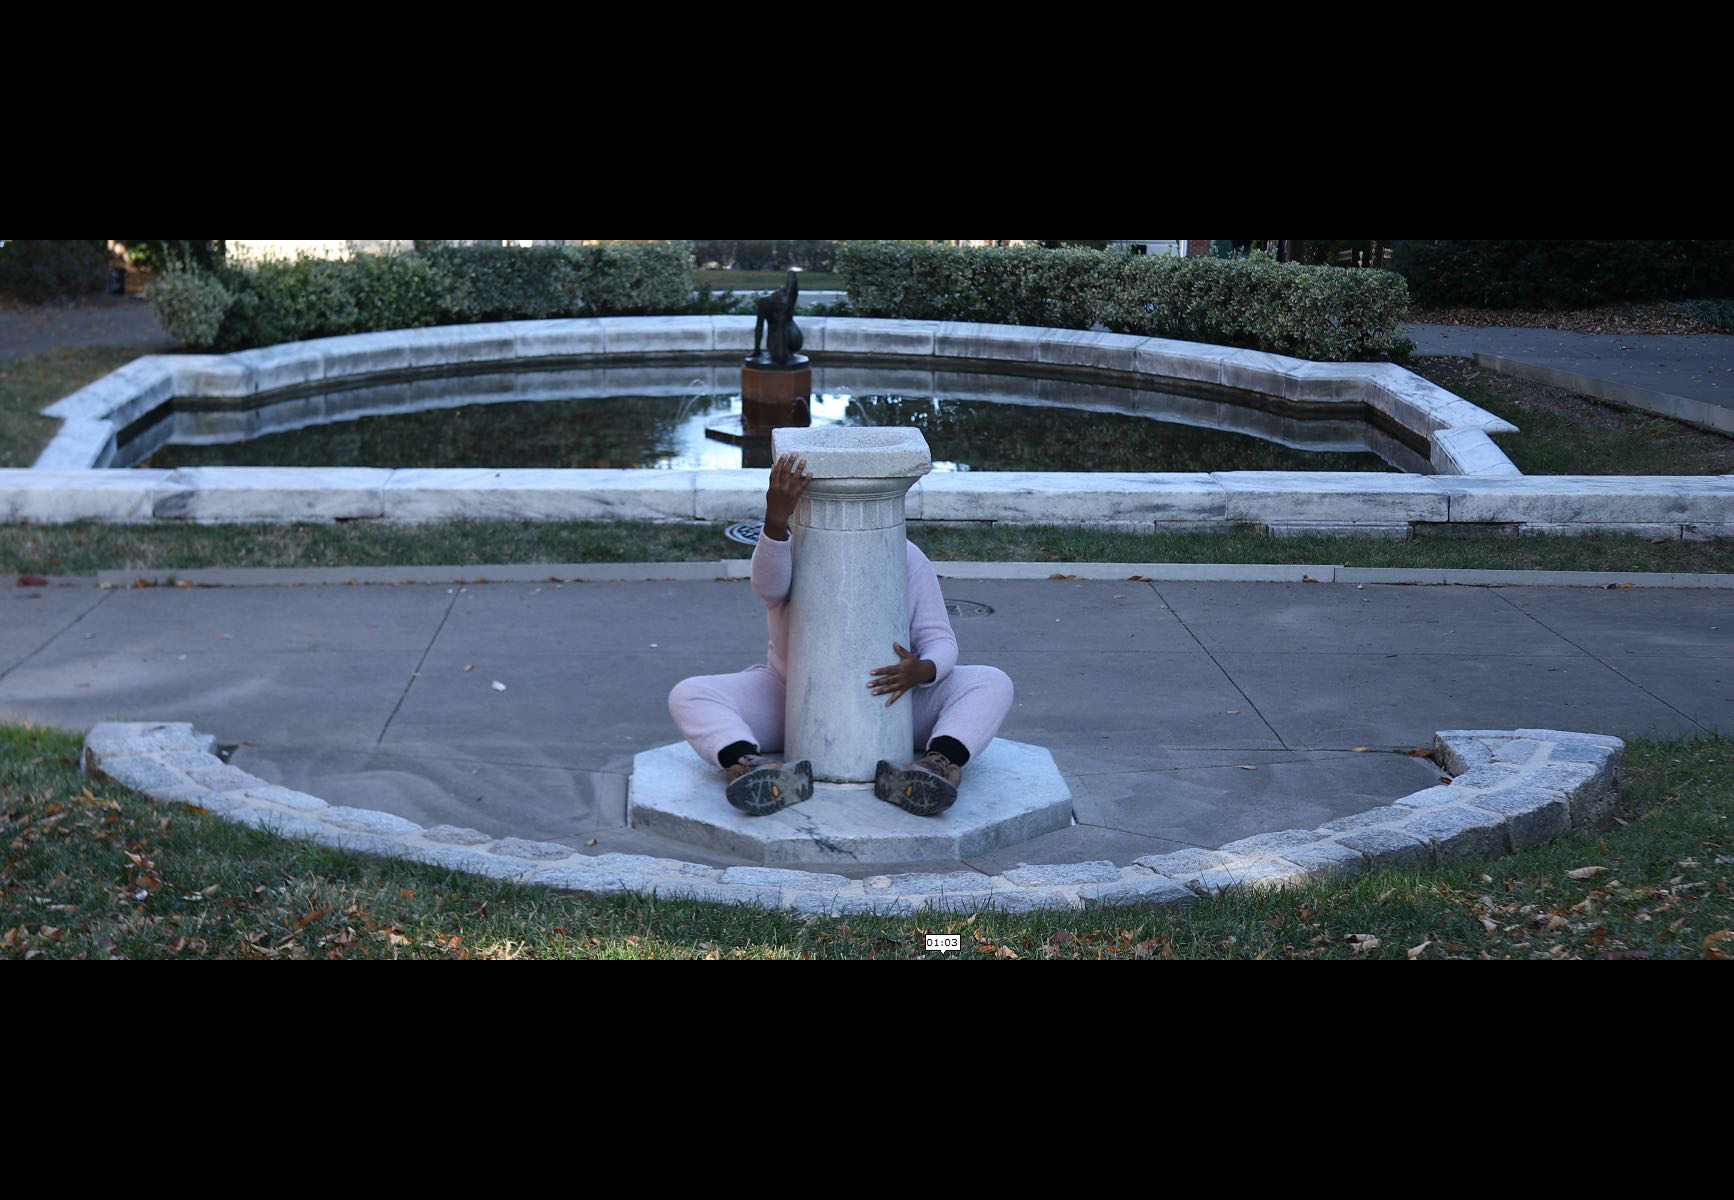 A man wraps himself around a pedestal against the background of a public fountain